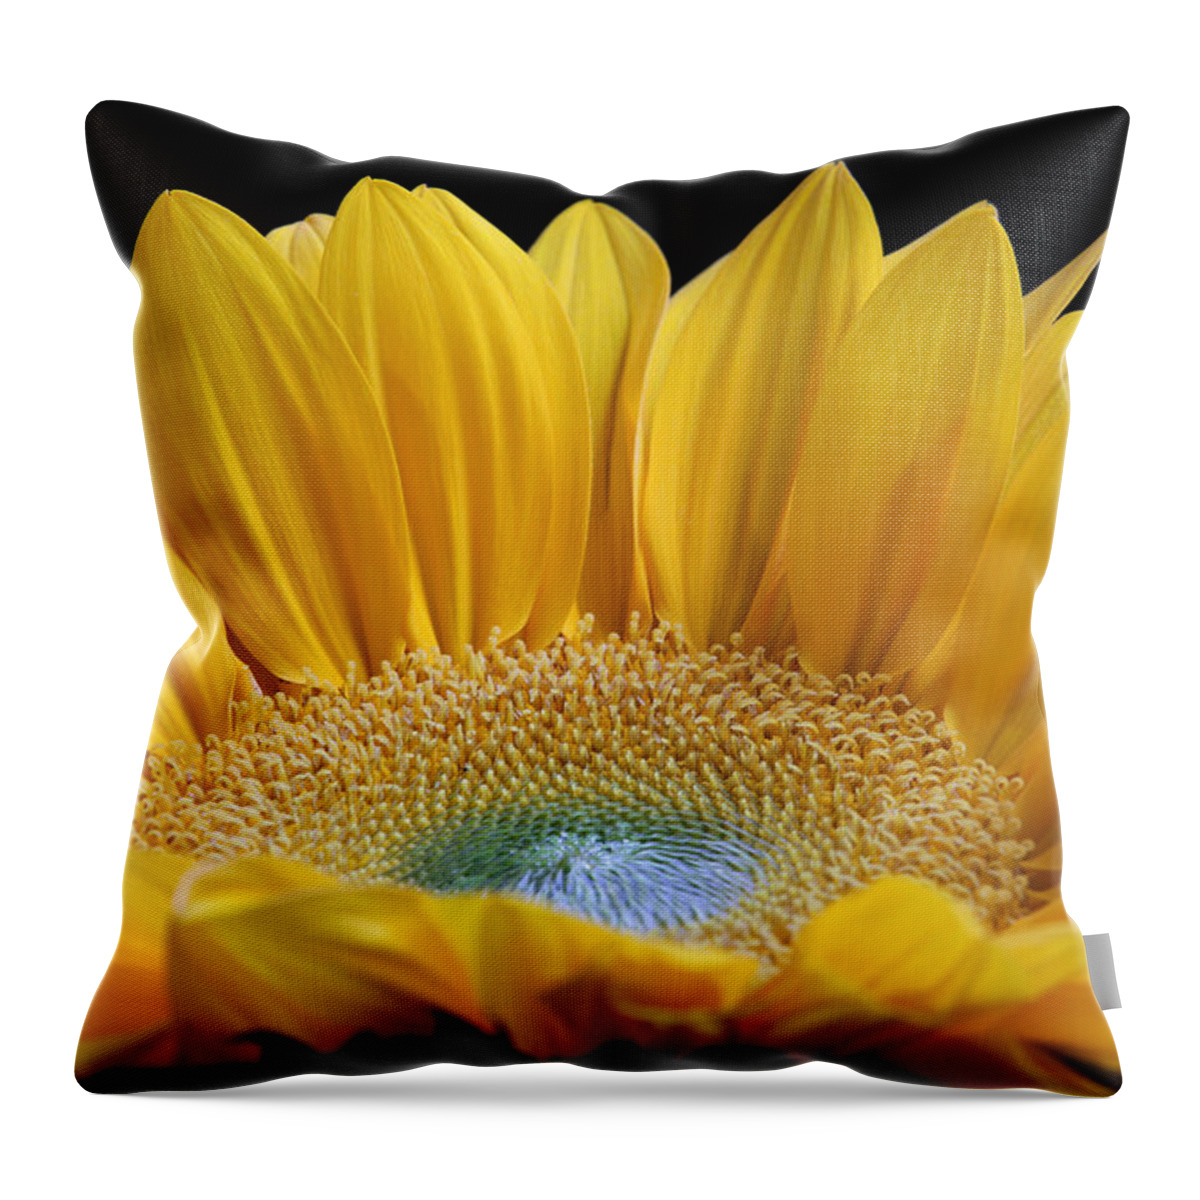 Sunflower Throw Pillow featuring the photograph Sometimes I Get a Good Feeling by Juergen Roth